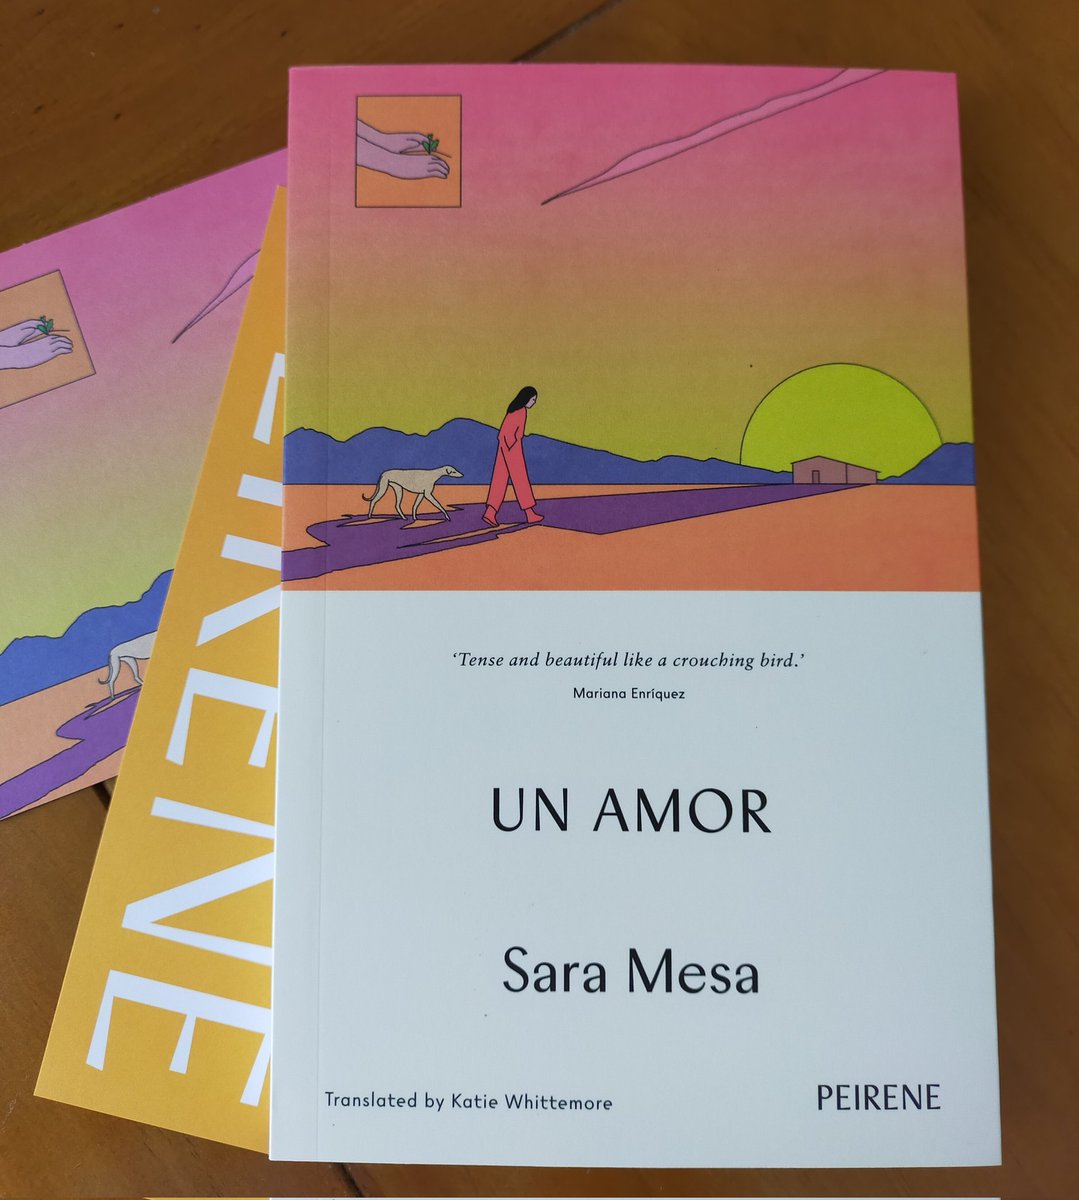 Excited to read the latest novel from Sara Mesa as I've been a fan for some time, especially as comes from @PeirenePress !